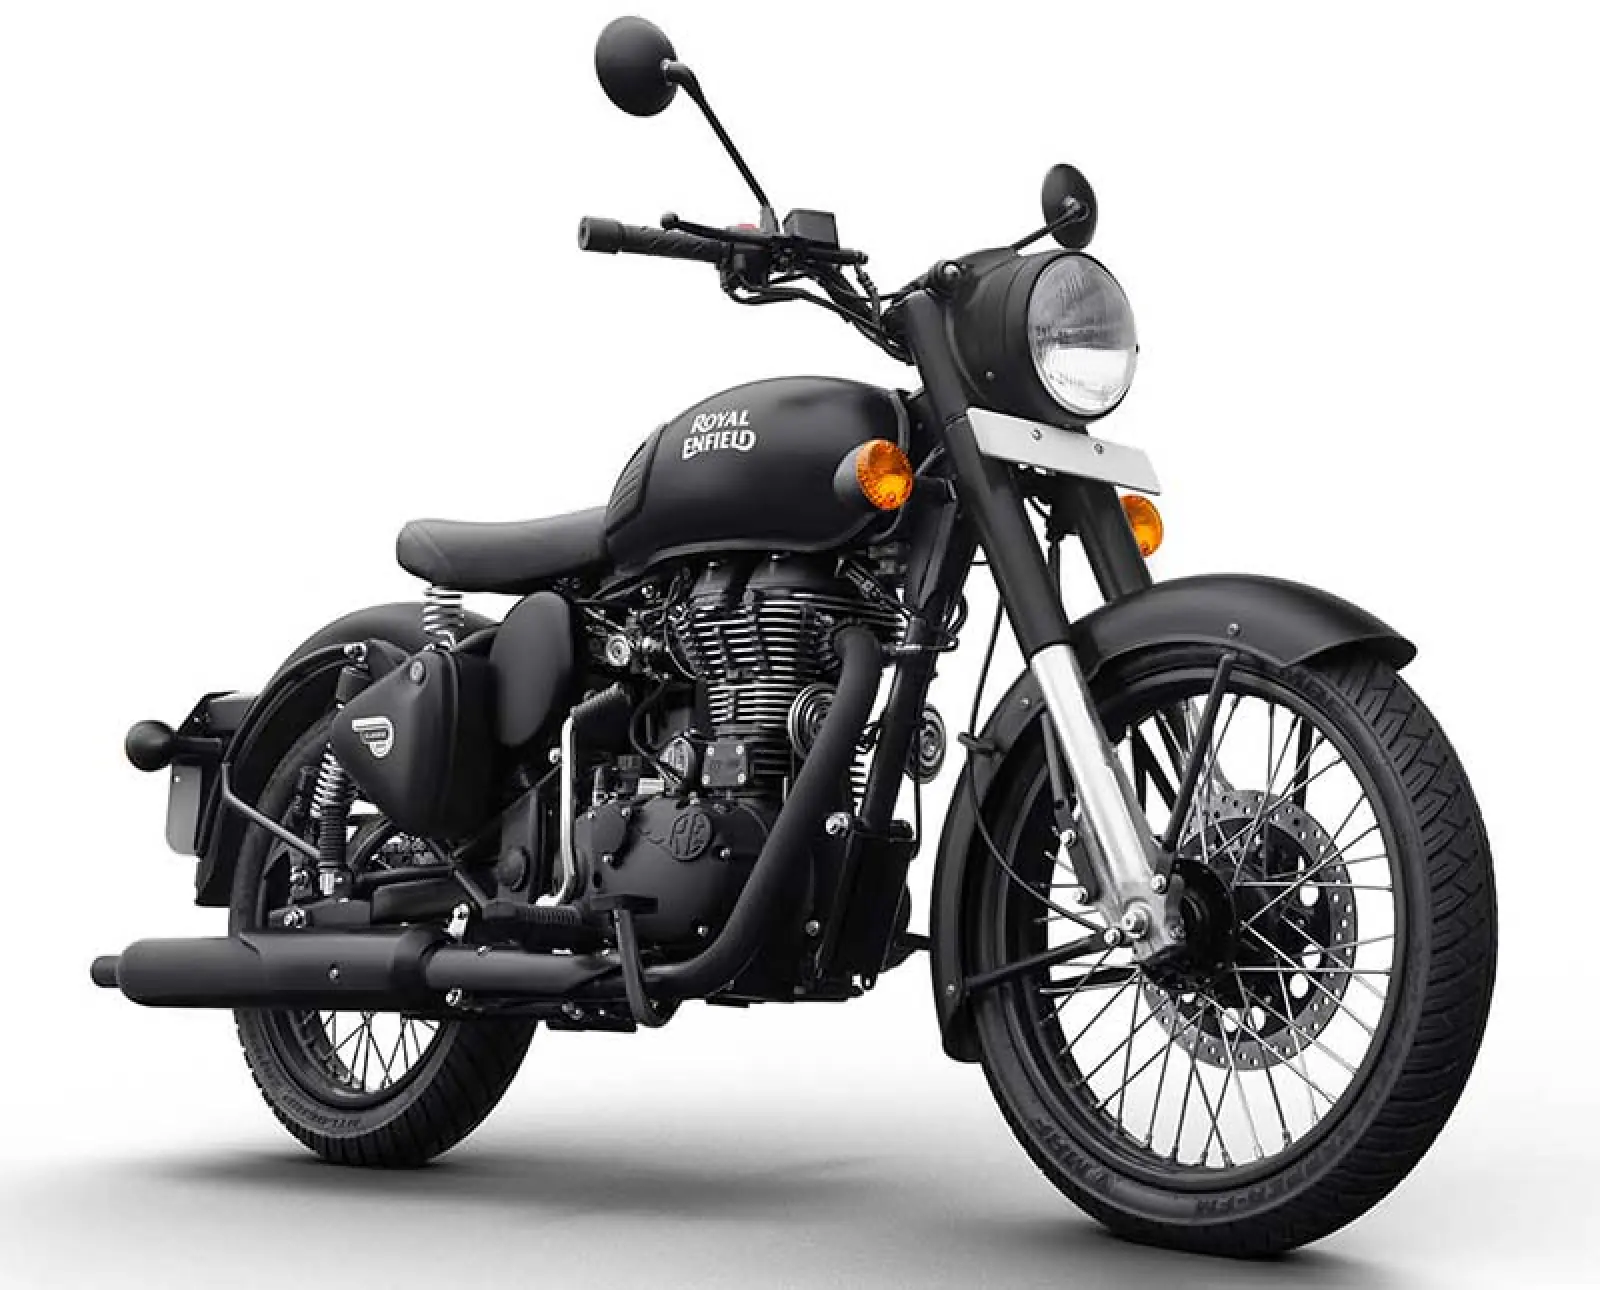 Travelling the world on a Royal Enfield bike has become easier, the company introduced this plan